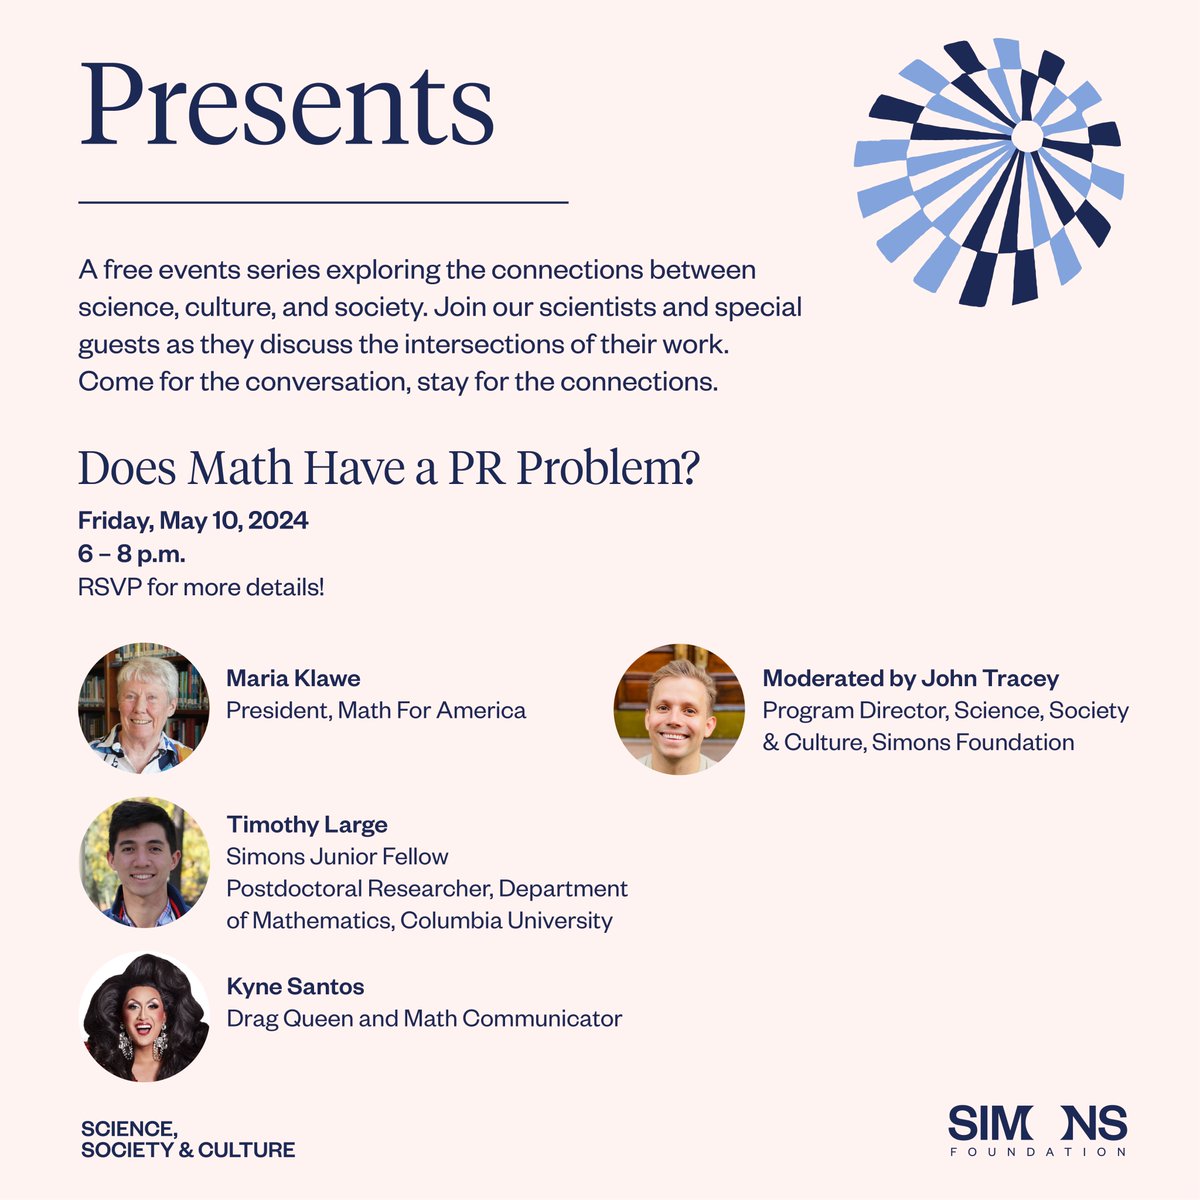 Still looking for something to do this Friday in #NYC? Join us for 'Does Math Have a PR Problem?' and dive into why math gets such a bad rap & the ways people are working to change that narrative. Register: eventbrite.com/e/does-math-ha…